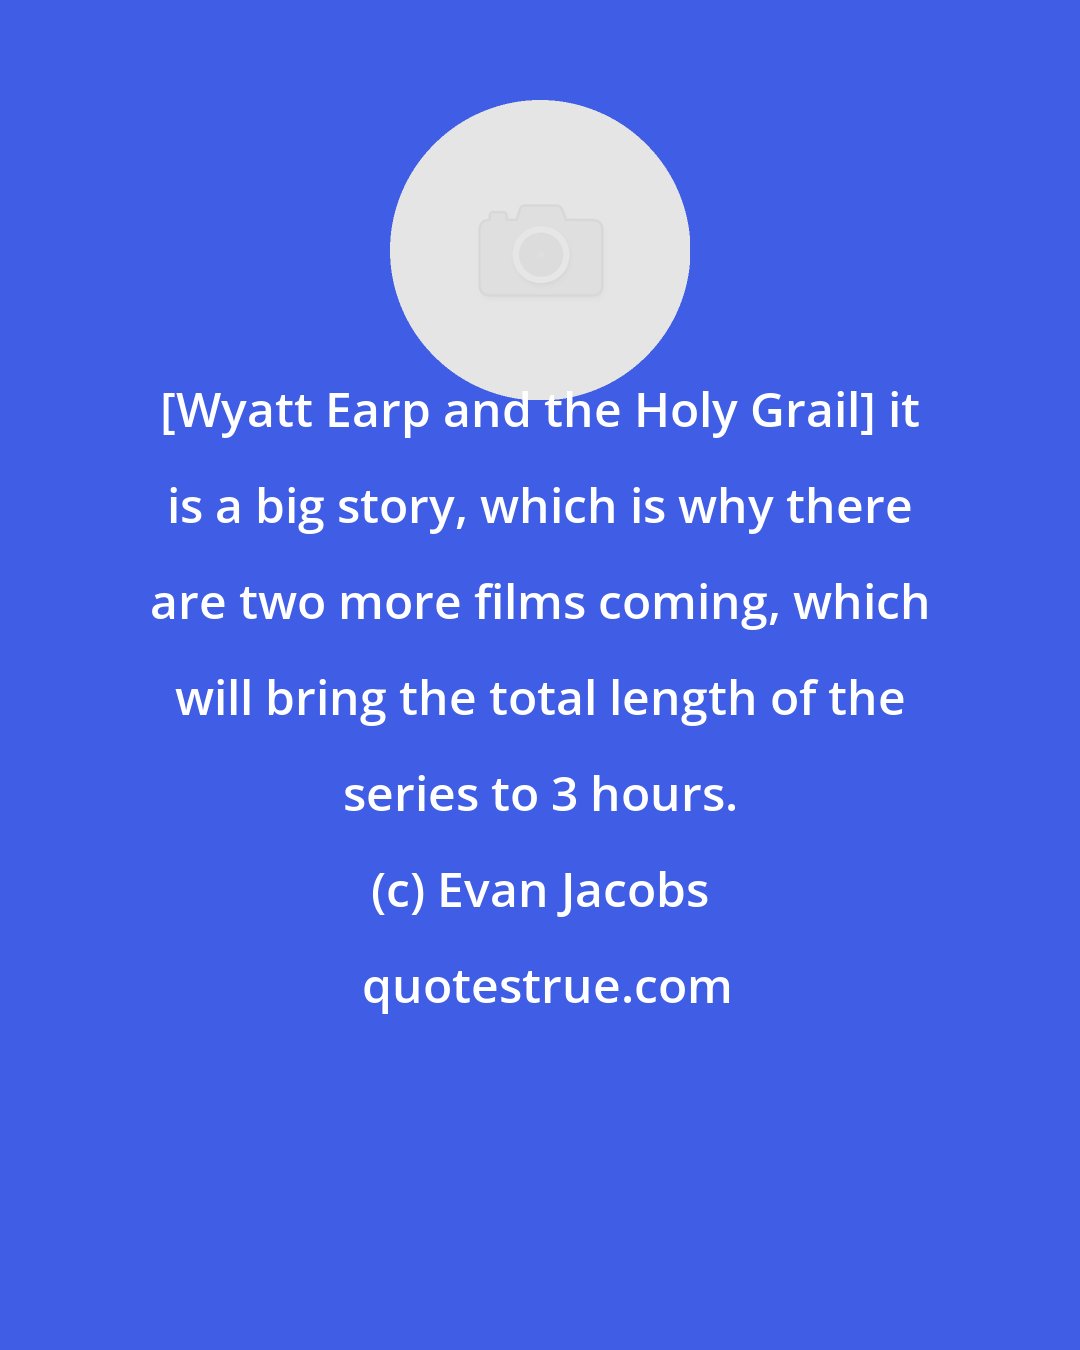 Evan Jacobs: [Wyatt Earp and the Holy Grail] it is a big story, which is why there are two more films coming, which will bring the total length of the series to 3 hours.